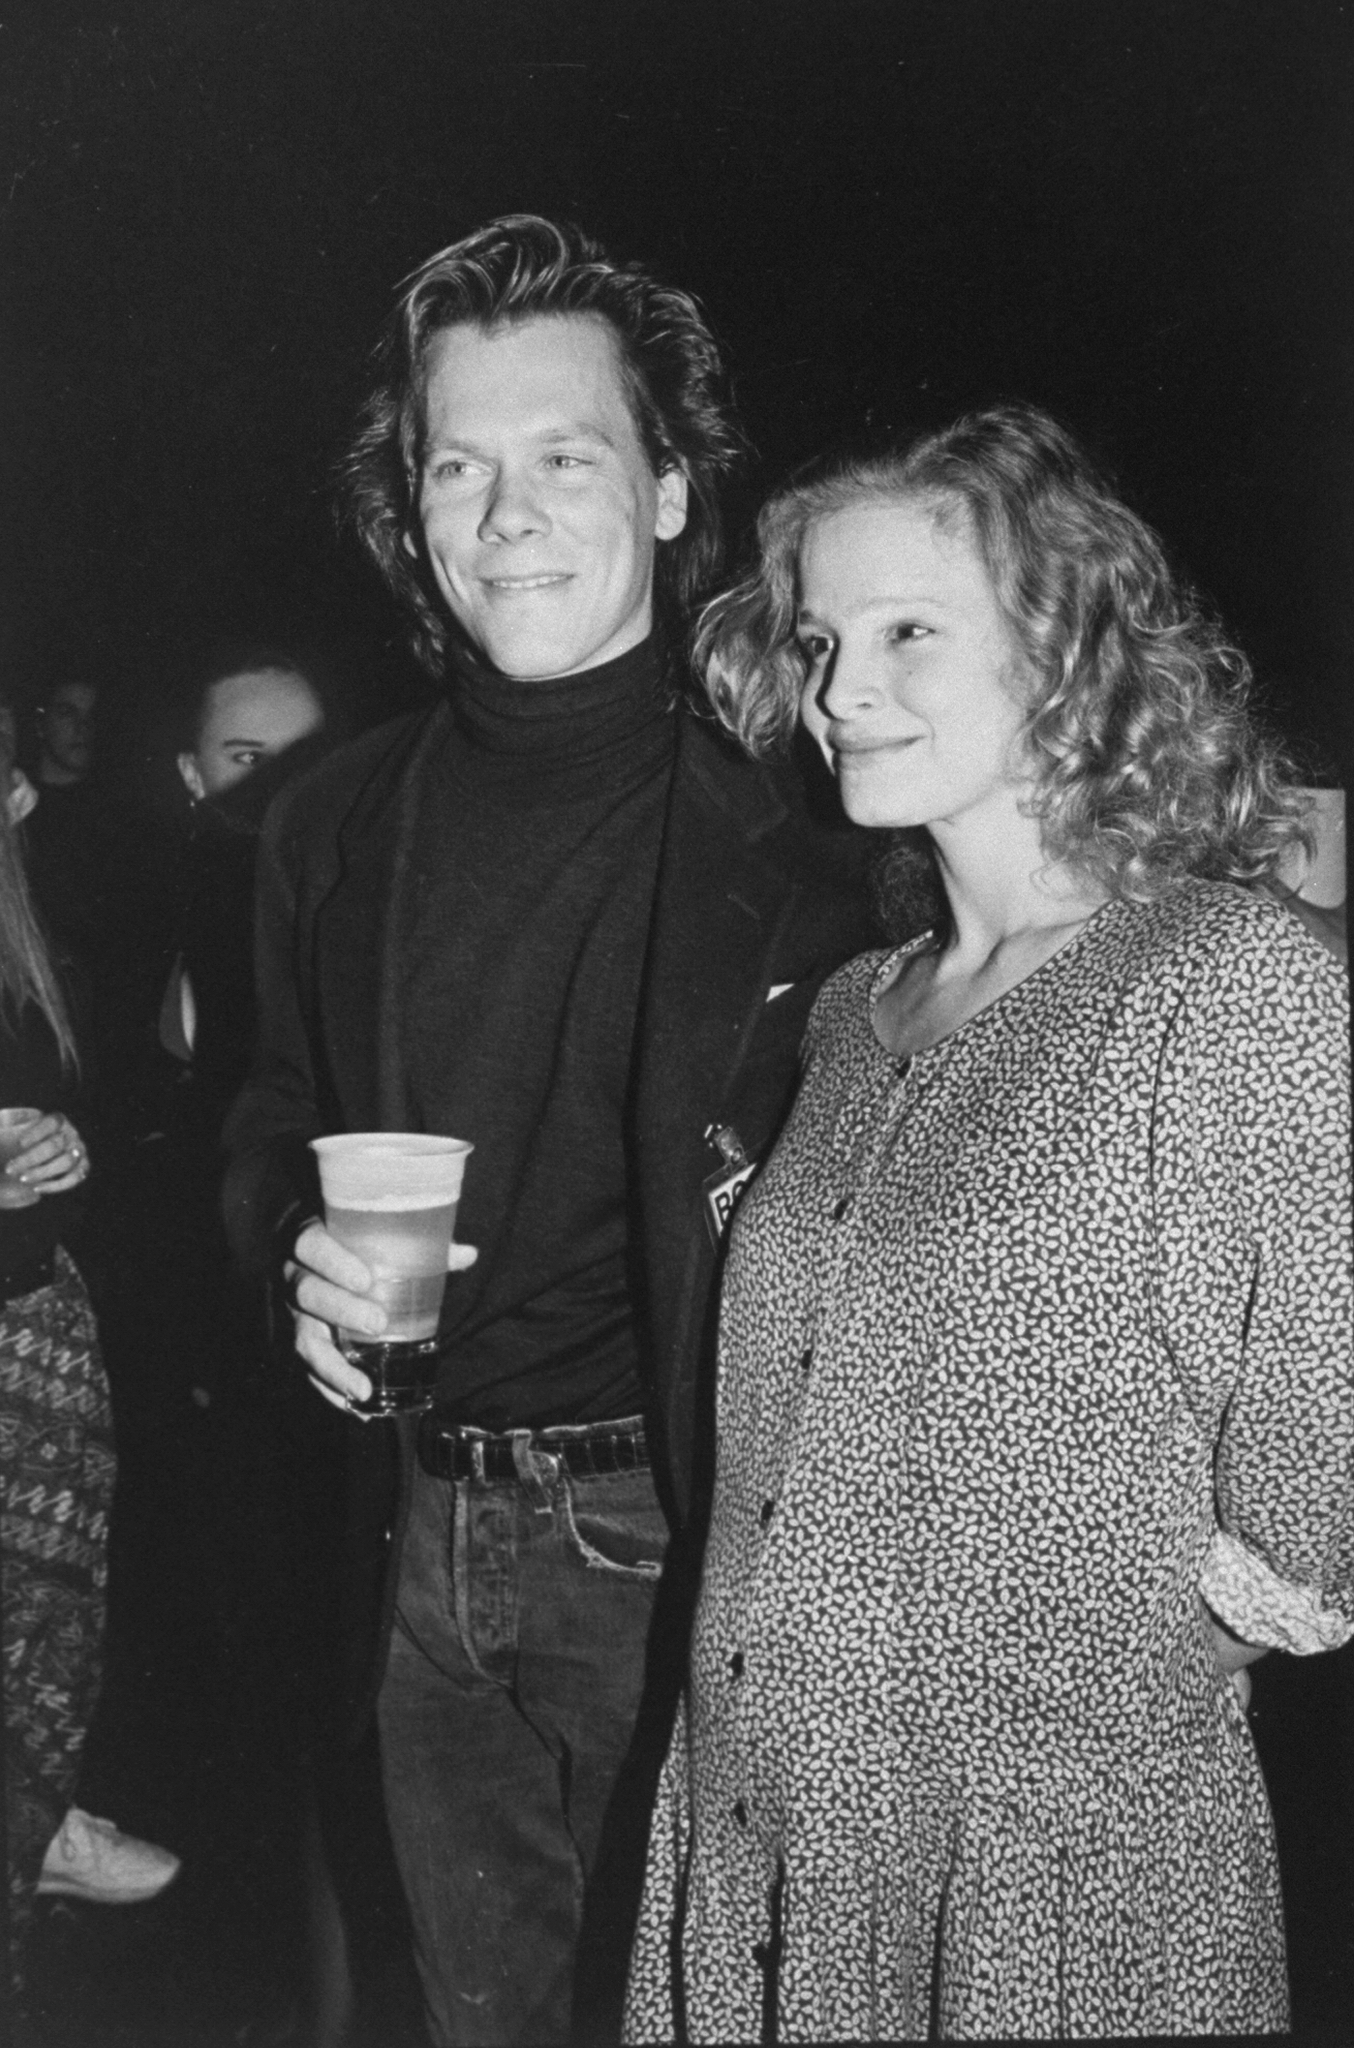 Actor Kevin Bacon (L) with his pregnant wife Kyra Sedgwick (R) at the fundraiser for People for Ethical Treatment of Animals at Palladium in January 1989. | Source: Getty Images